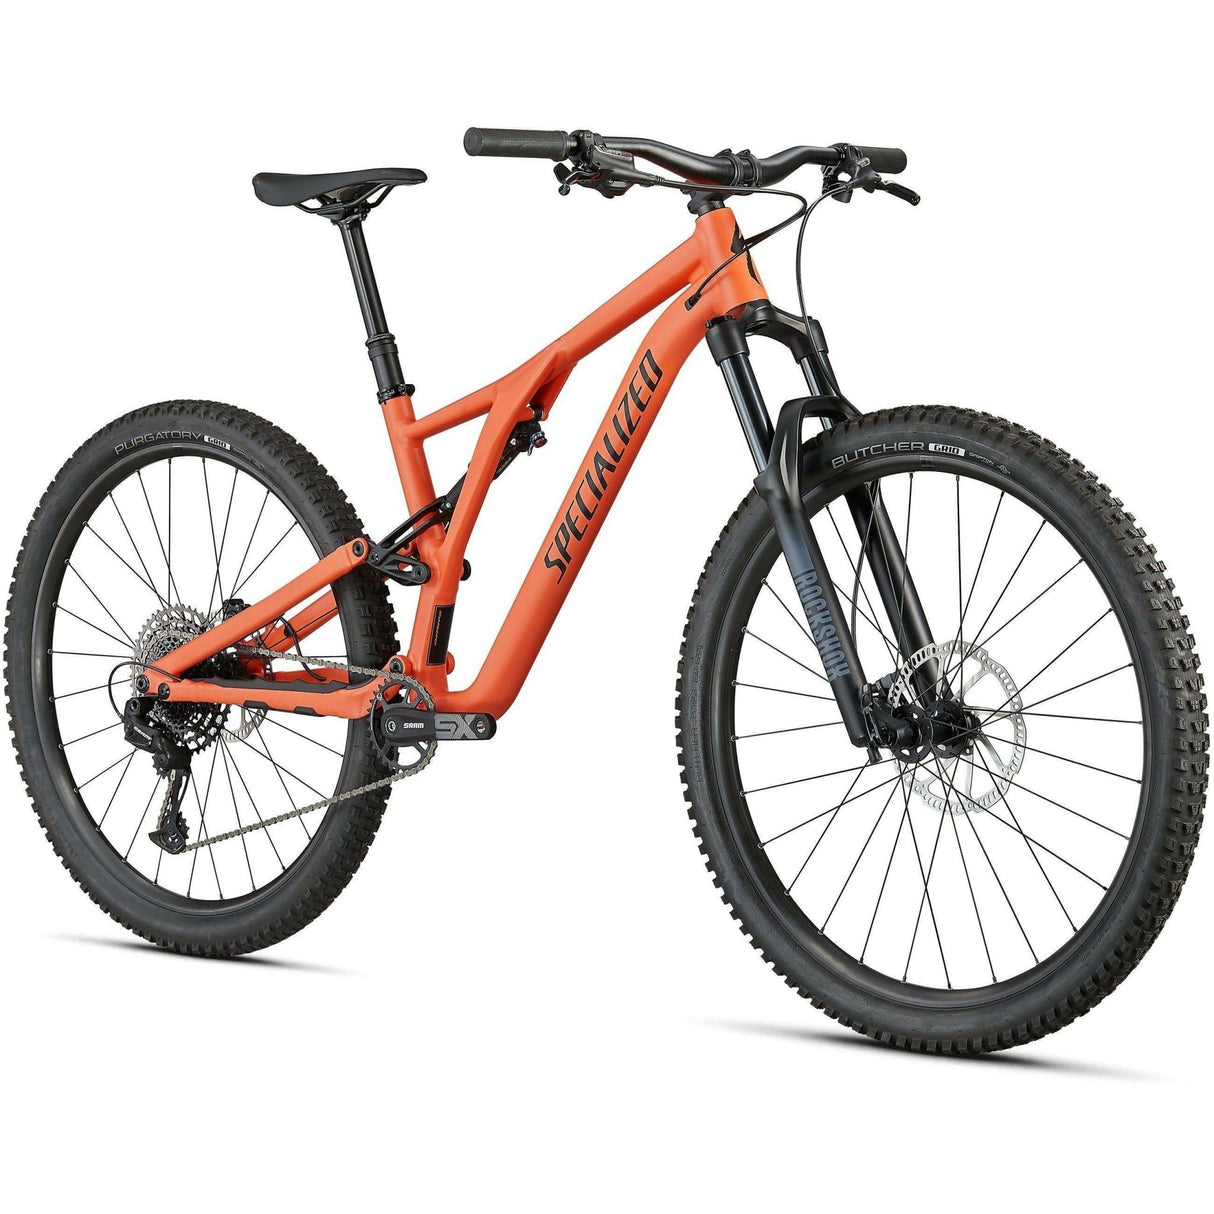 Specialized Stumpjumper Alloy | Strictly Bicycles